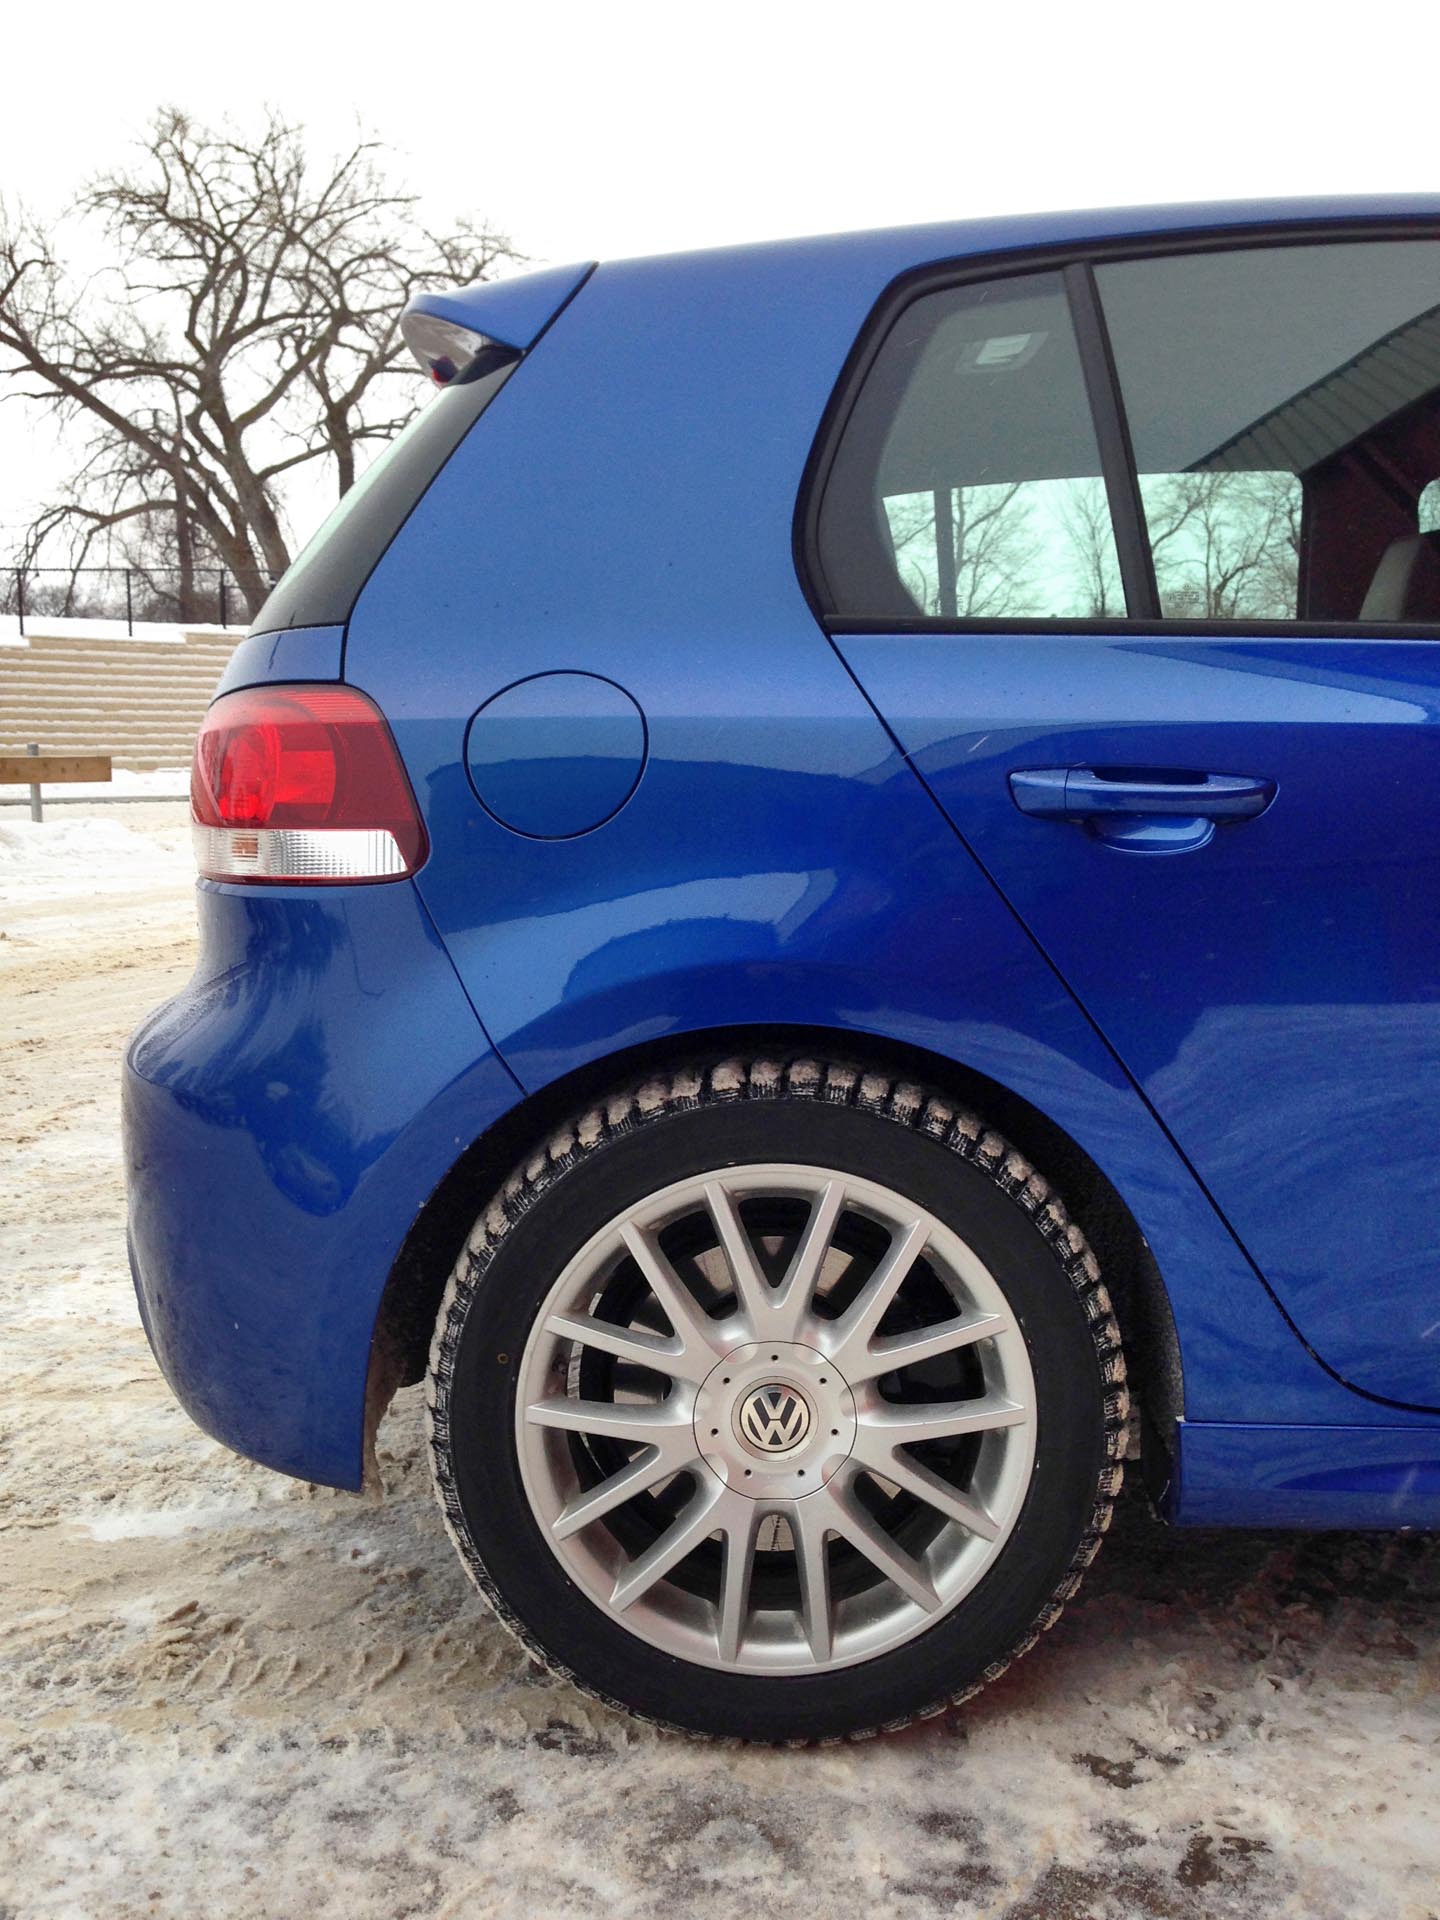 Winter Tire Review: of Observe Toyo G3-Ice - Autos.ca Page - 3 Page | 3 3